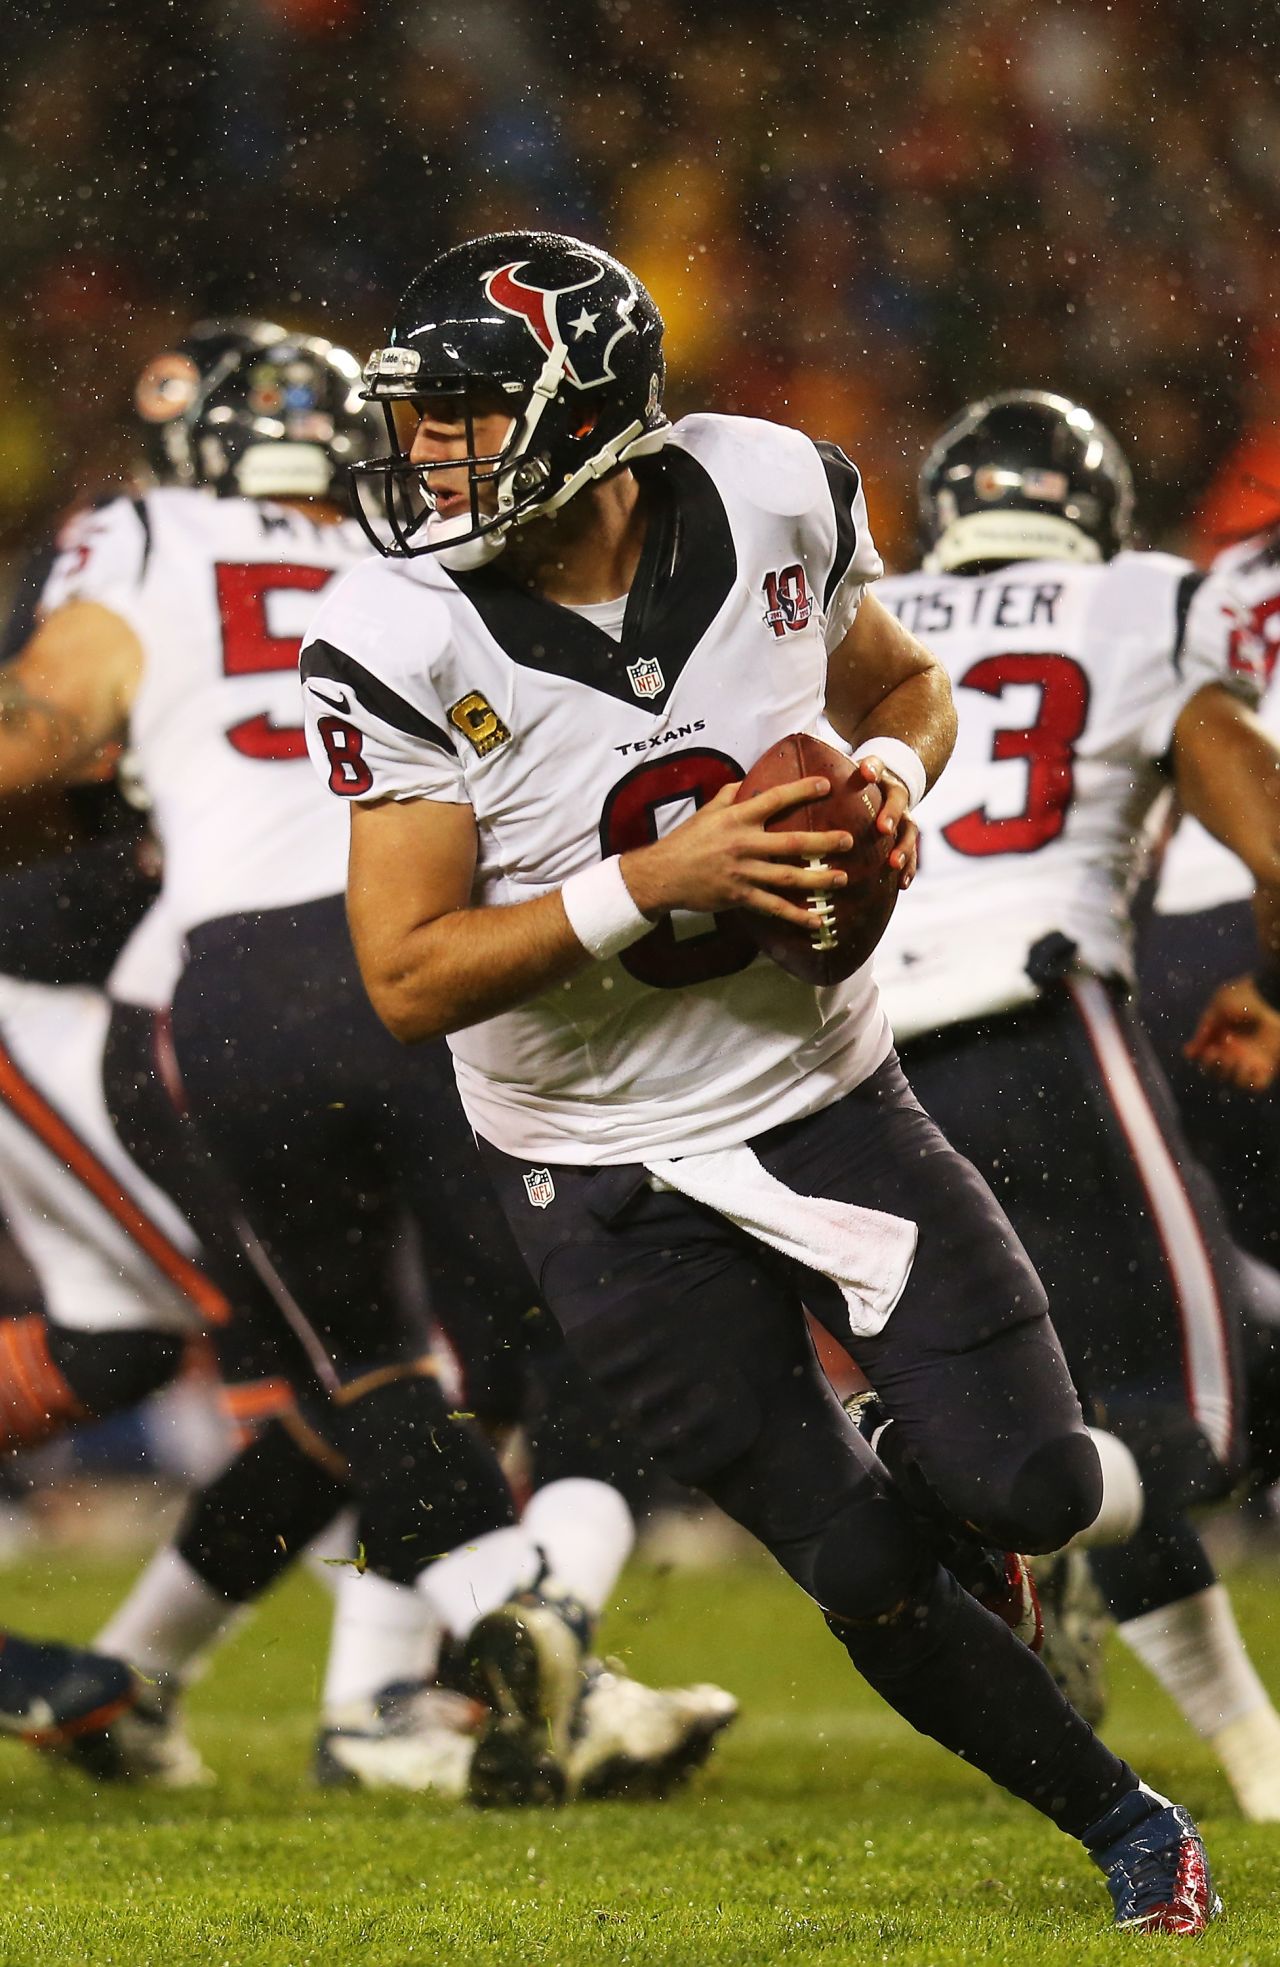 Quarterback Matt Schaub of the Texans drops back to pass against the Bears in the first quarter on Sunday.